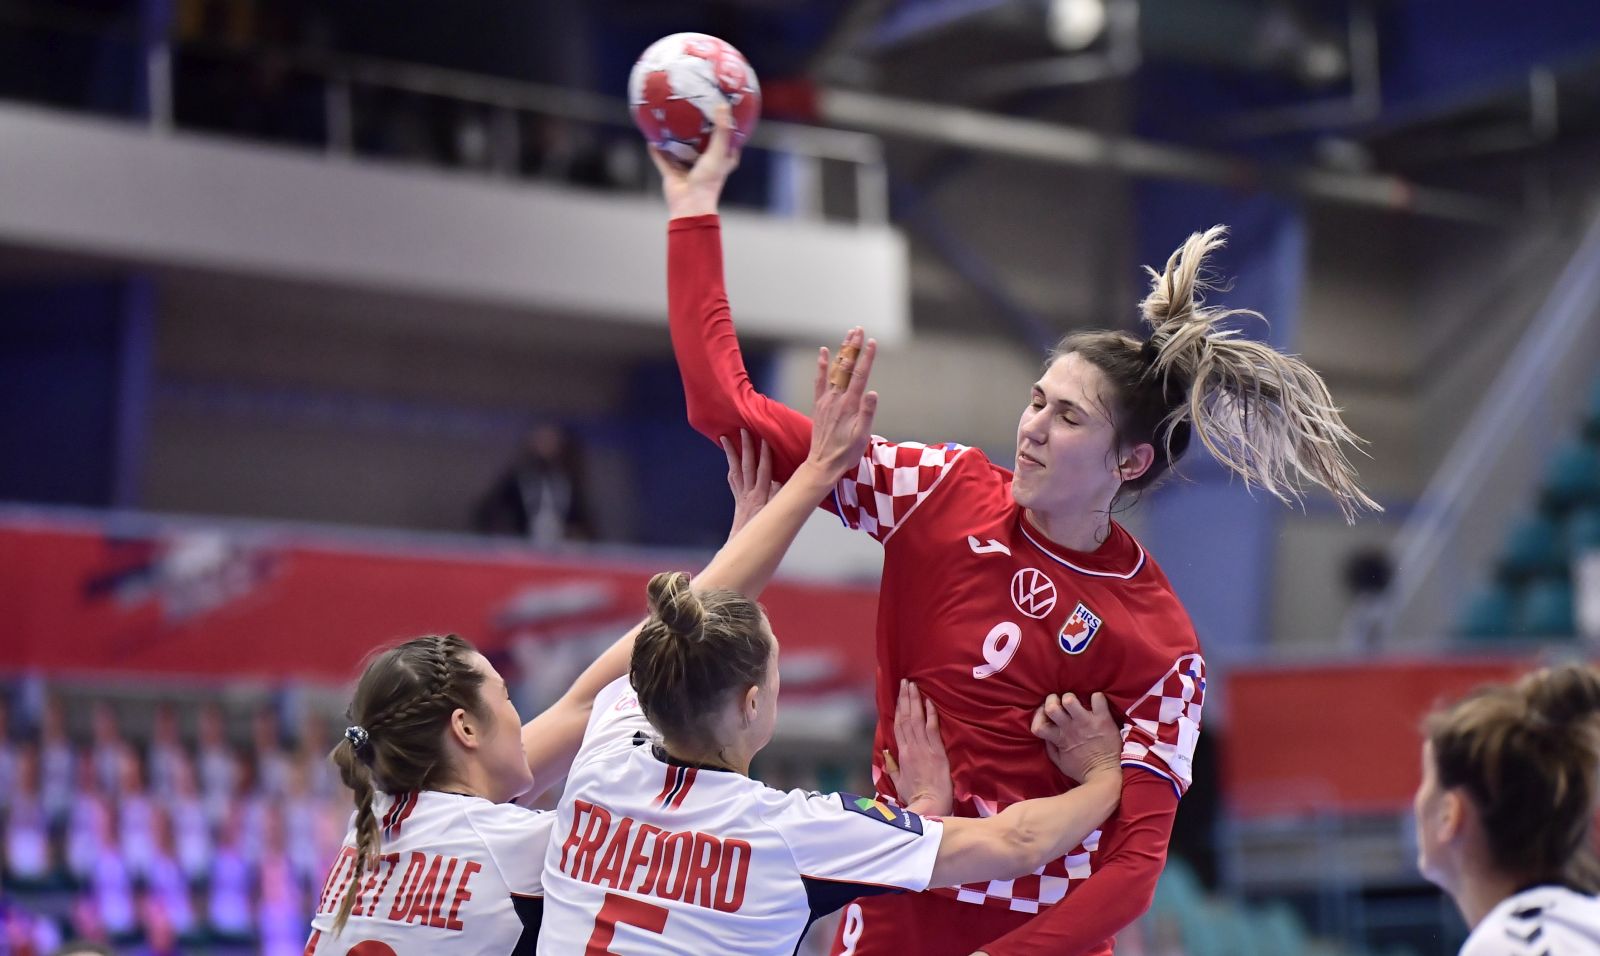 epa08879874 Camila Micijevic (C) of Croatia is blocked by Kari Dale (L) and Marit Frafjord of Norway,  during the EHF EURO 2020 European Women's Handball Main Round - Group II match between Croatia and Norway at Sydbank Arena in Kolding, Denmark, 12 December 2020.  EPA/Bo Amstrup  DENMARK OUT